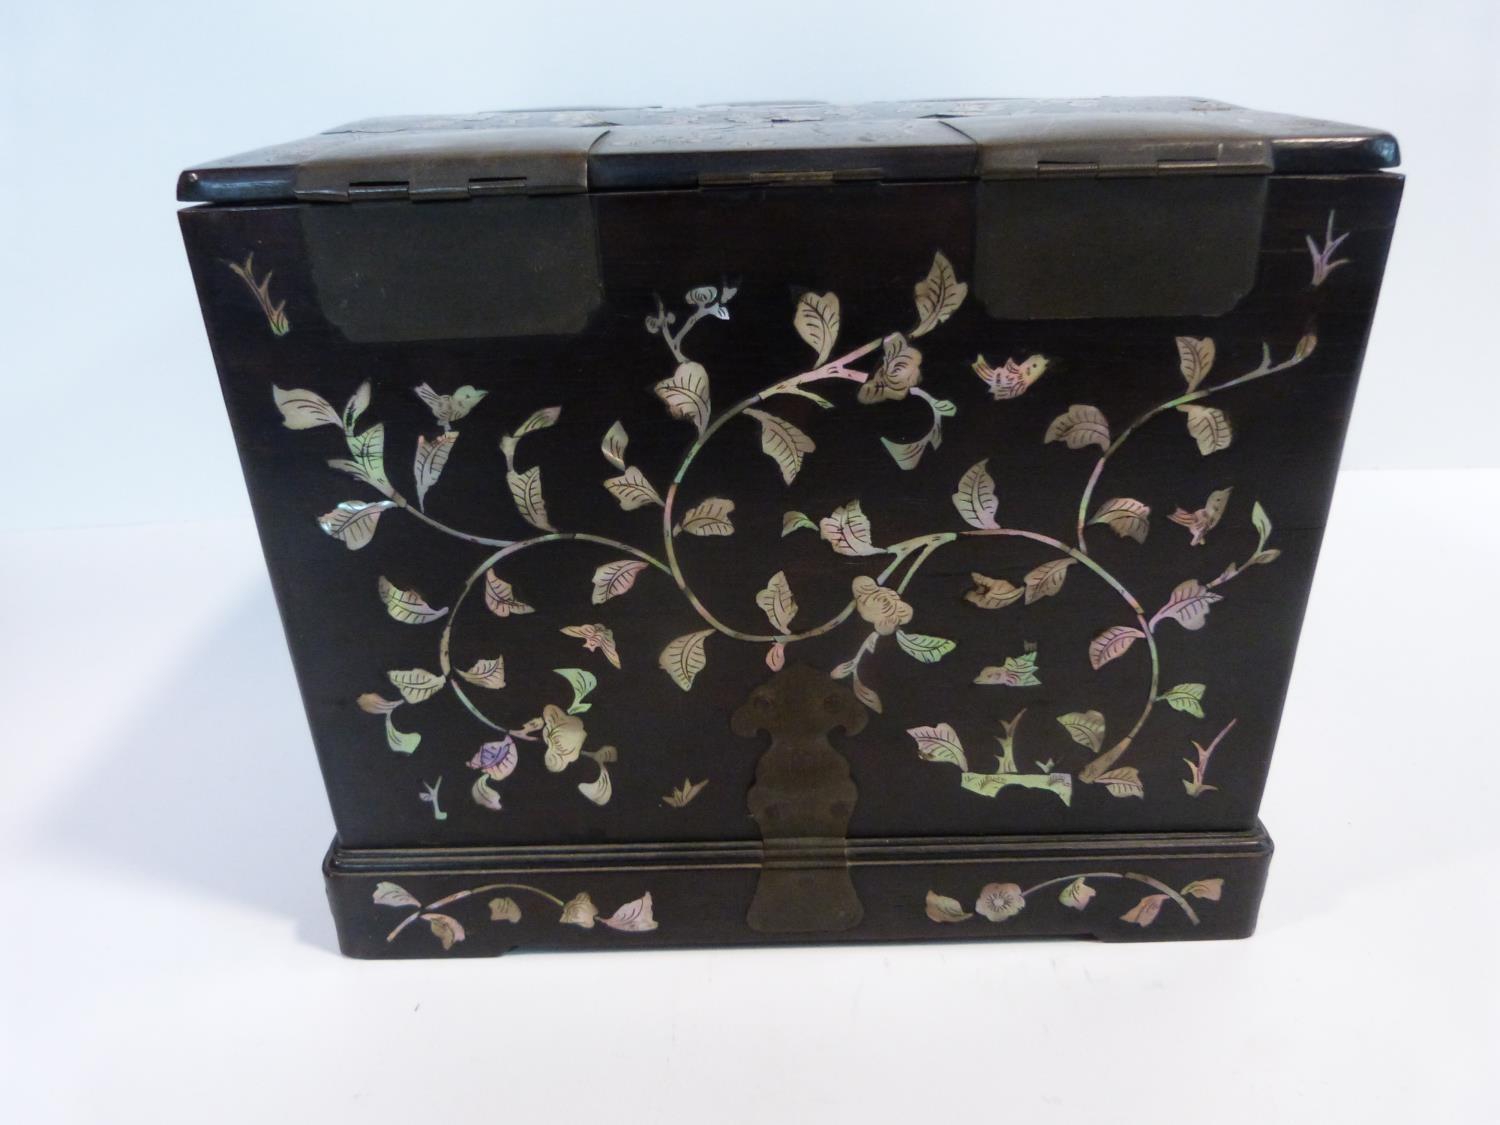 A 19th century Chinese rosewood travelling vanity box decorated with inlaid mother of pearl figures, - Image 19 of 22